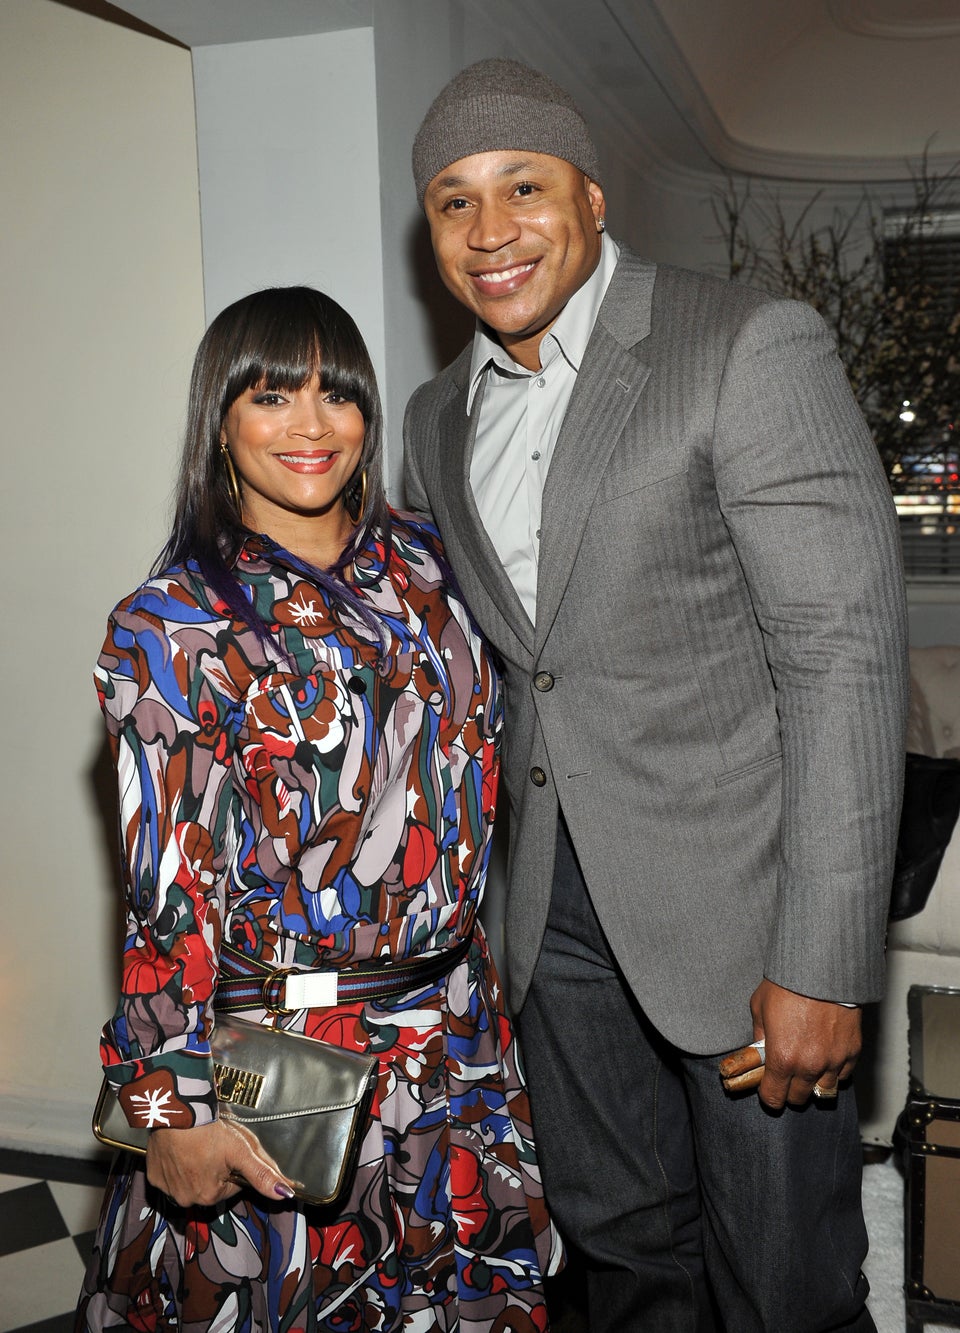 LL Cool J’s Wife Threw A Surprise Party For Her King To Celebrate His Forthcoming Kennedy Center Honor